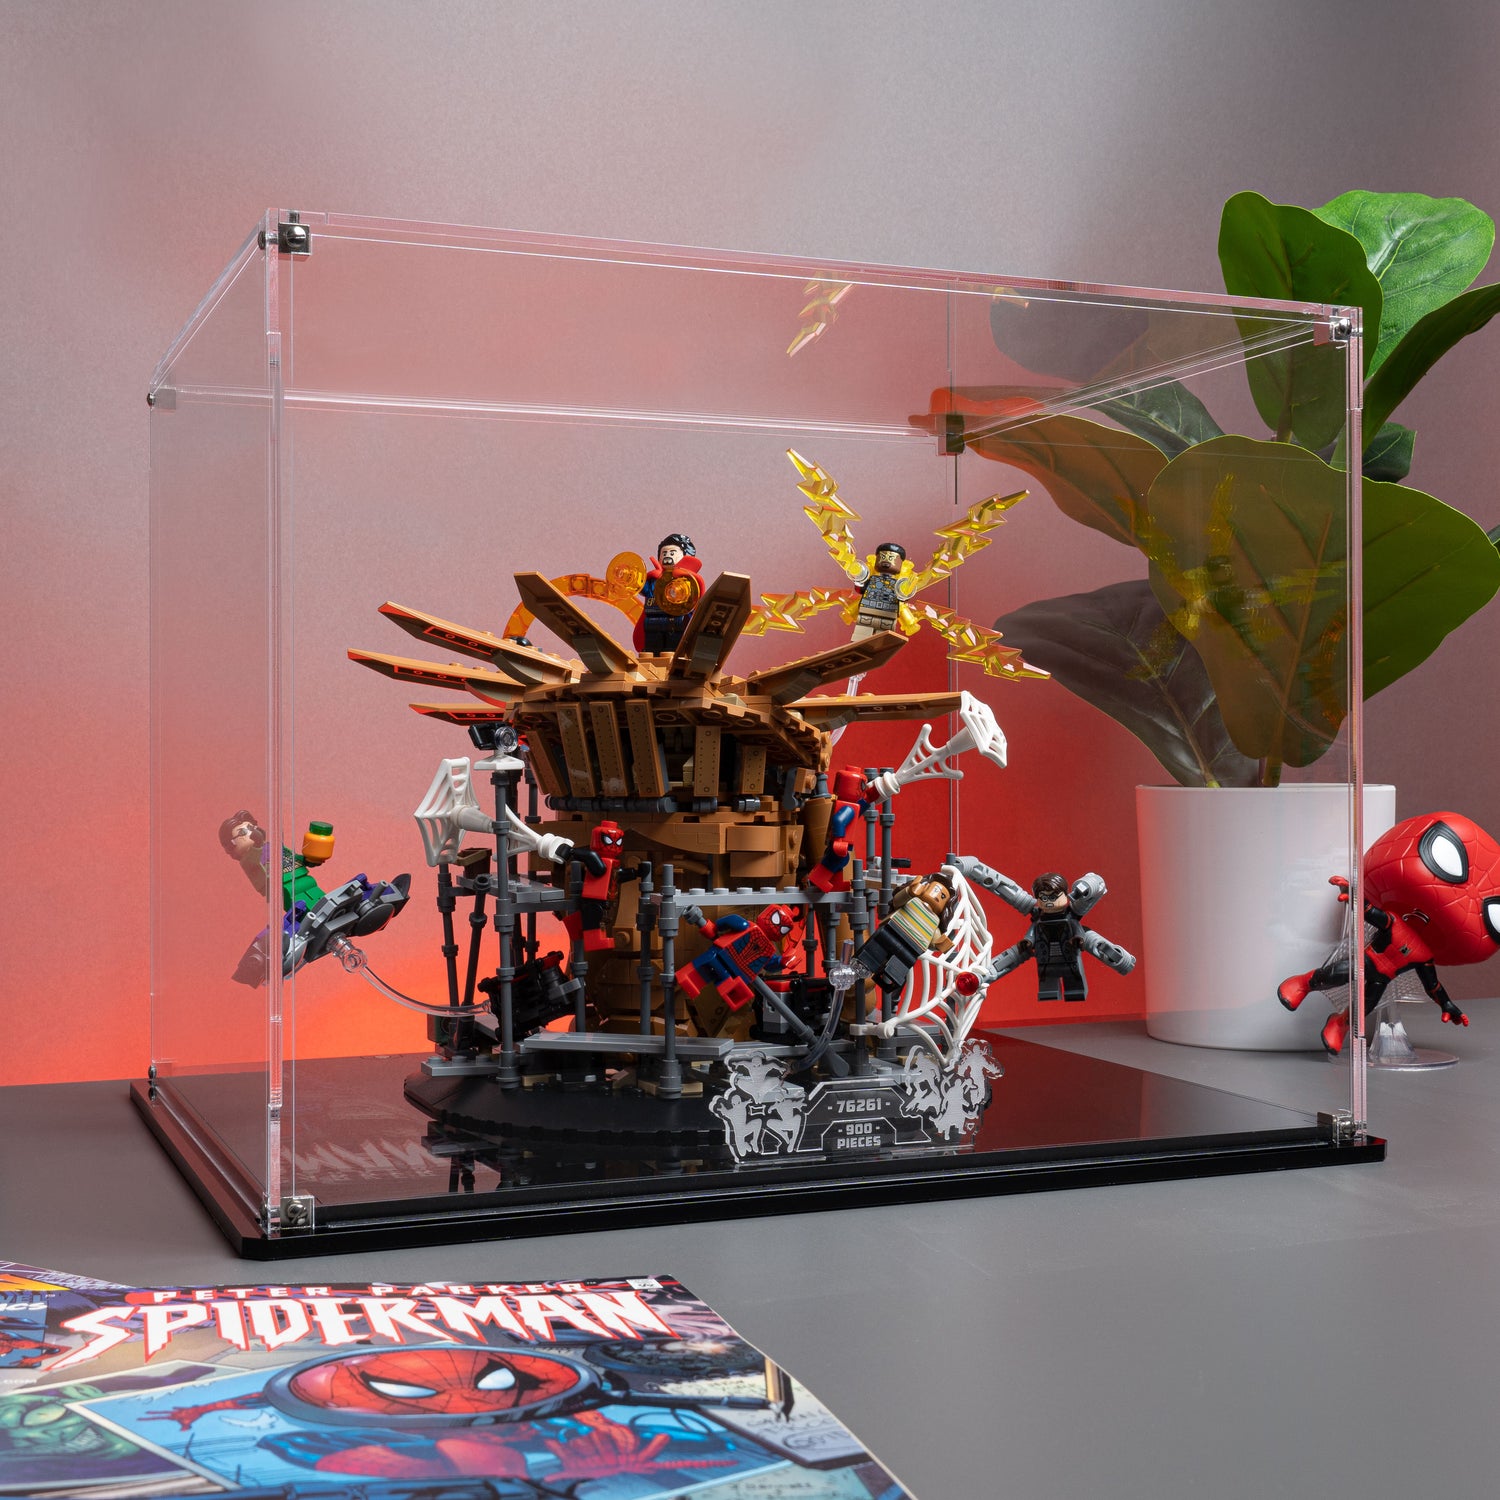 Protect this iconic scene with our crystal clear Perspex® display case